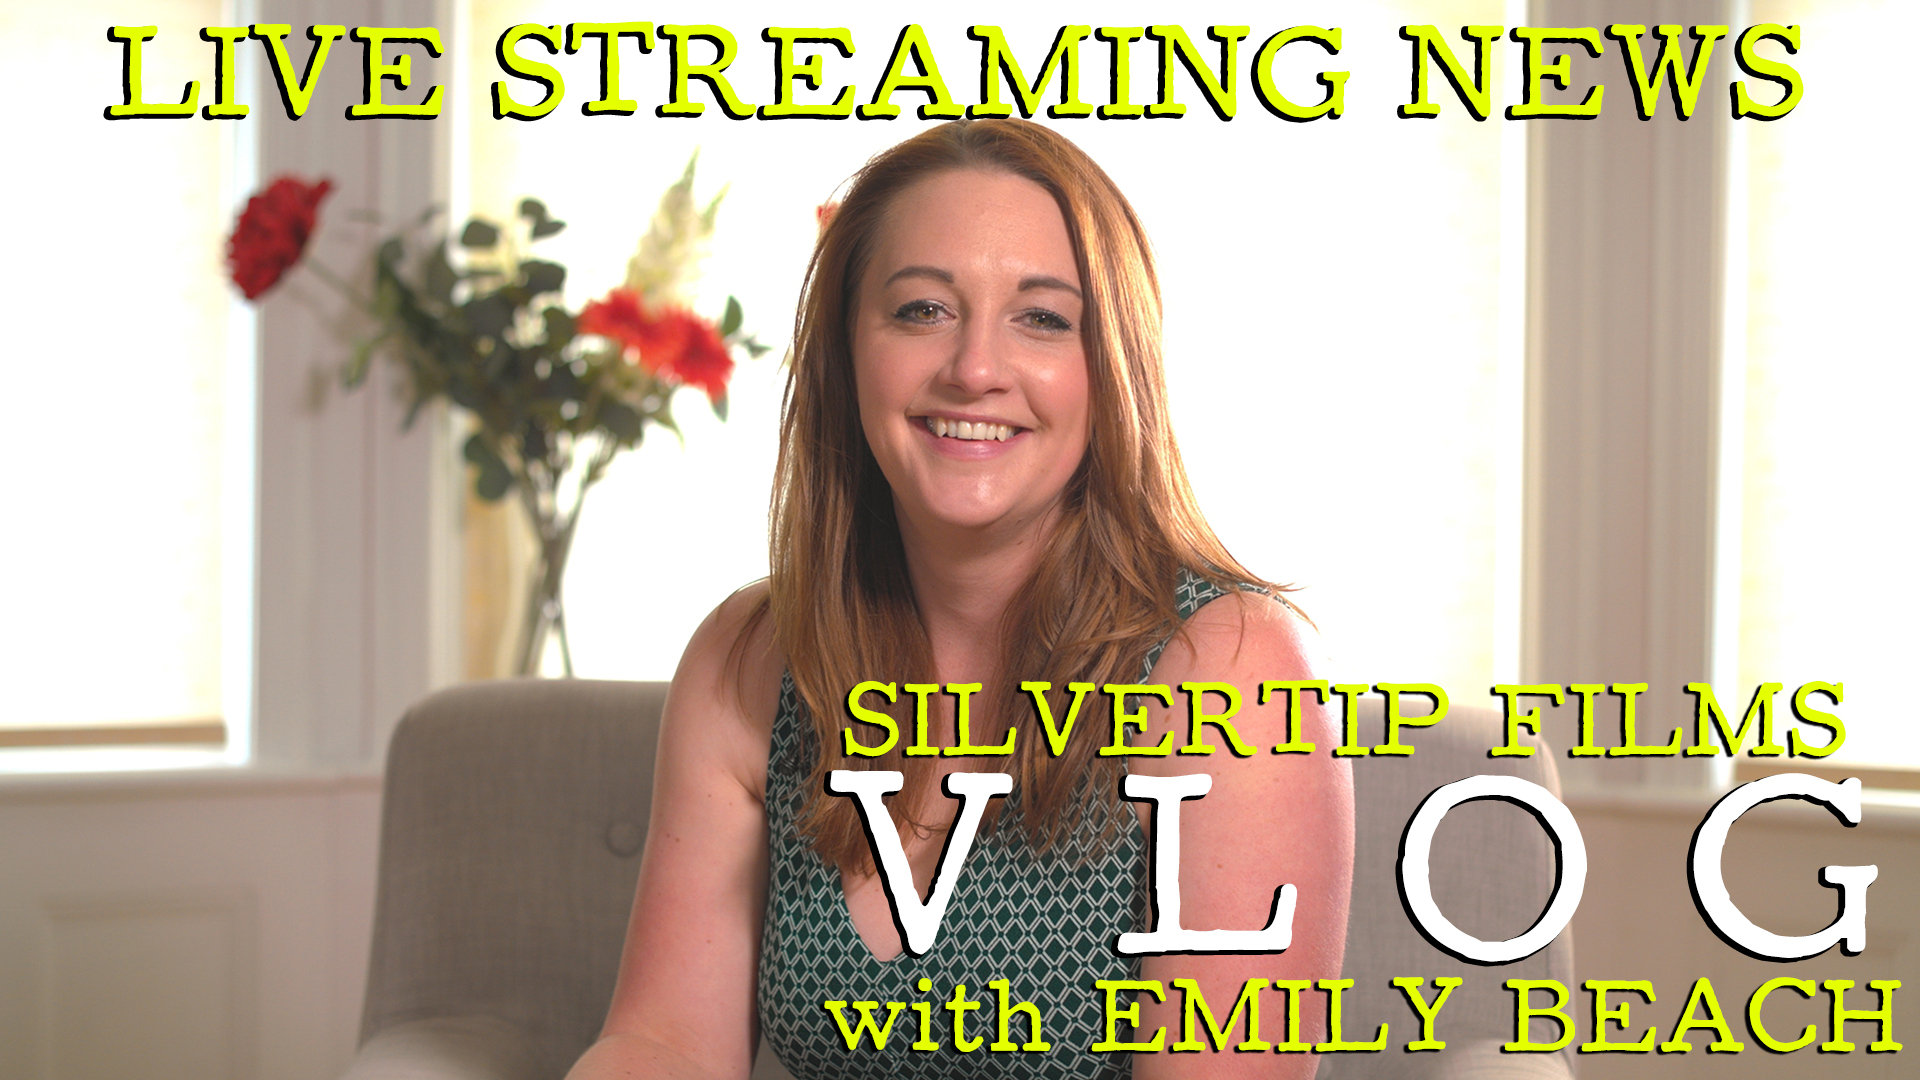 Silvertip Vlog June 2021 Livestreaming Special presented by Emily Beach